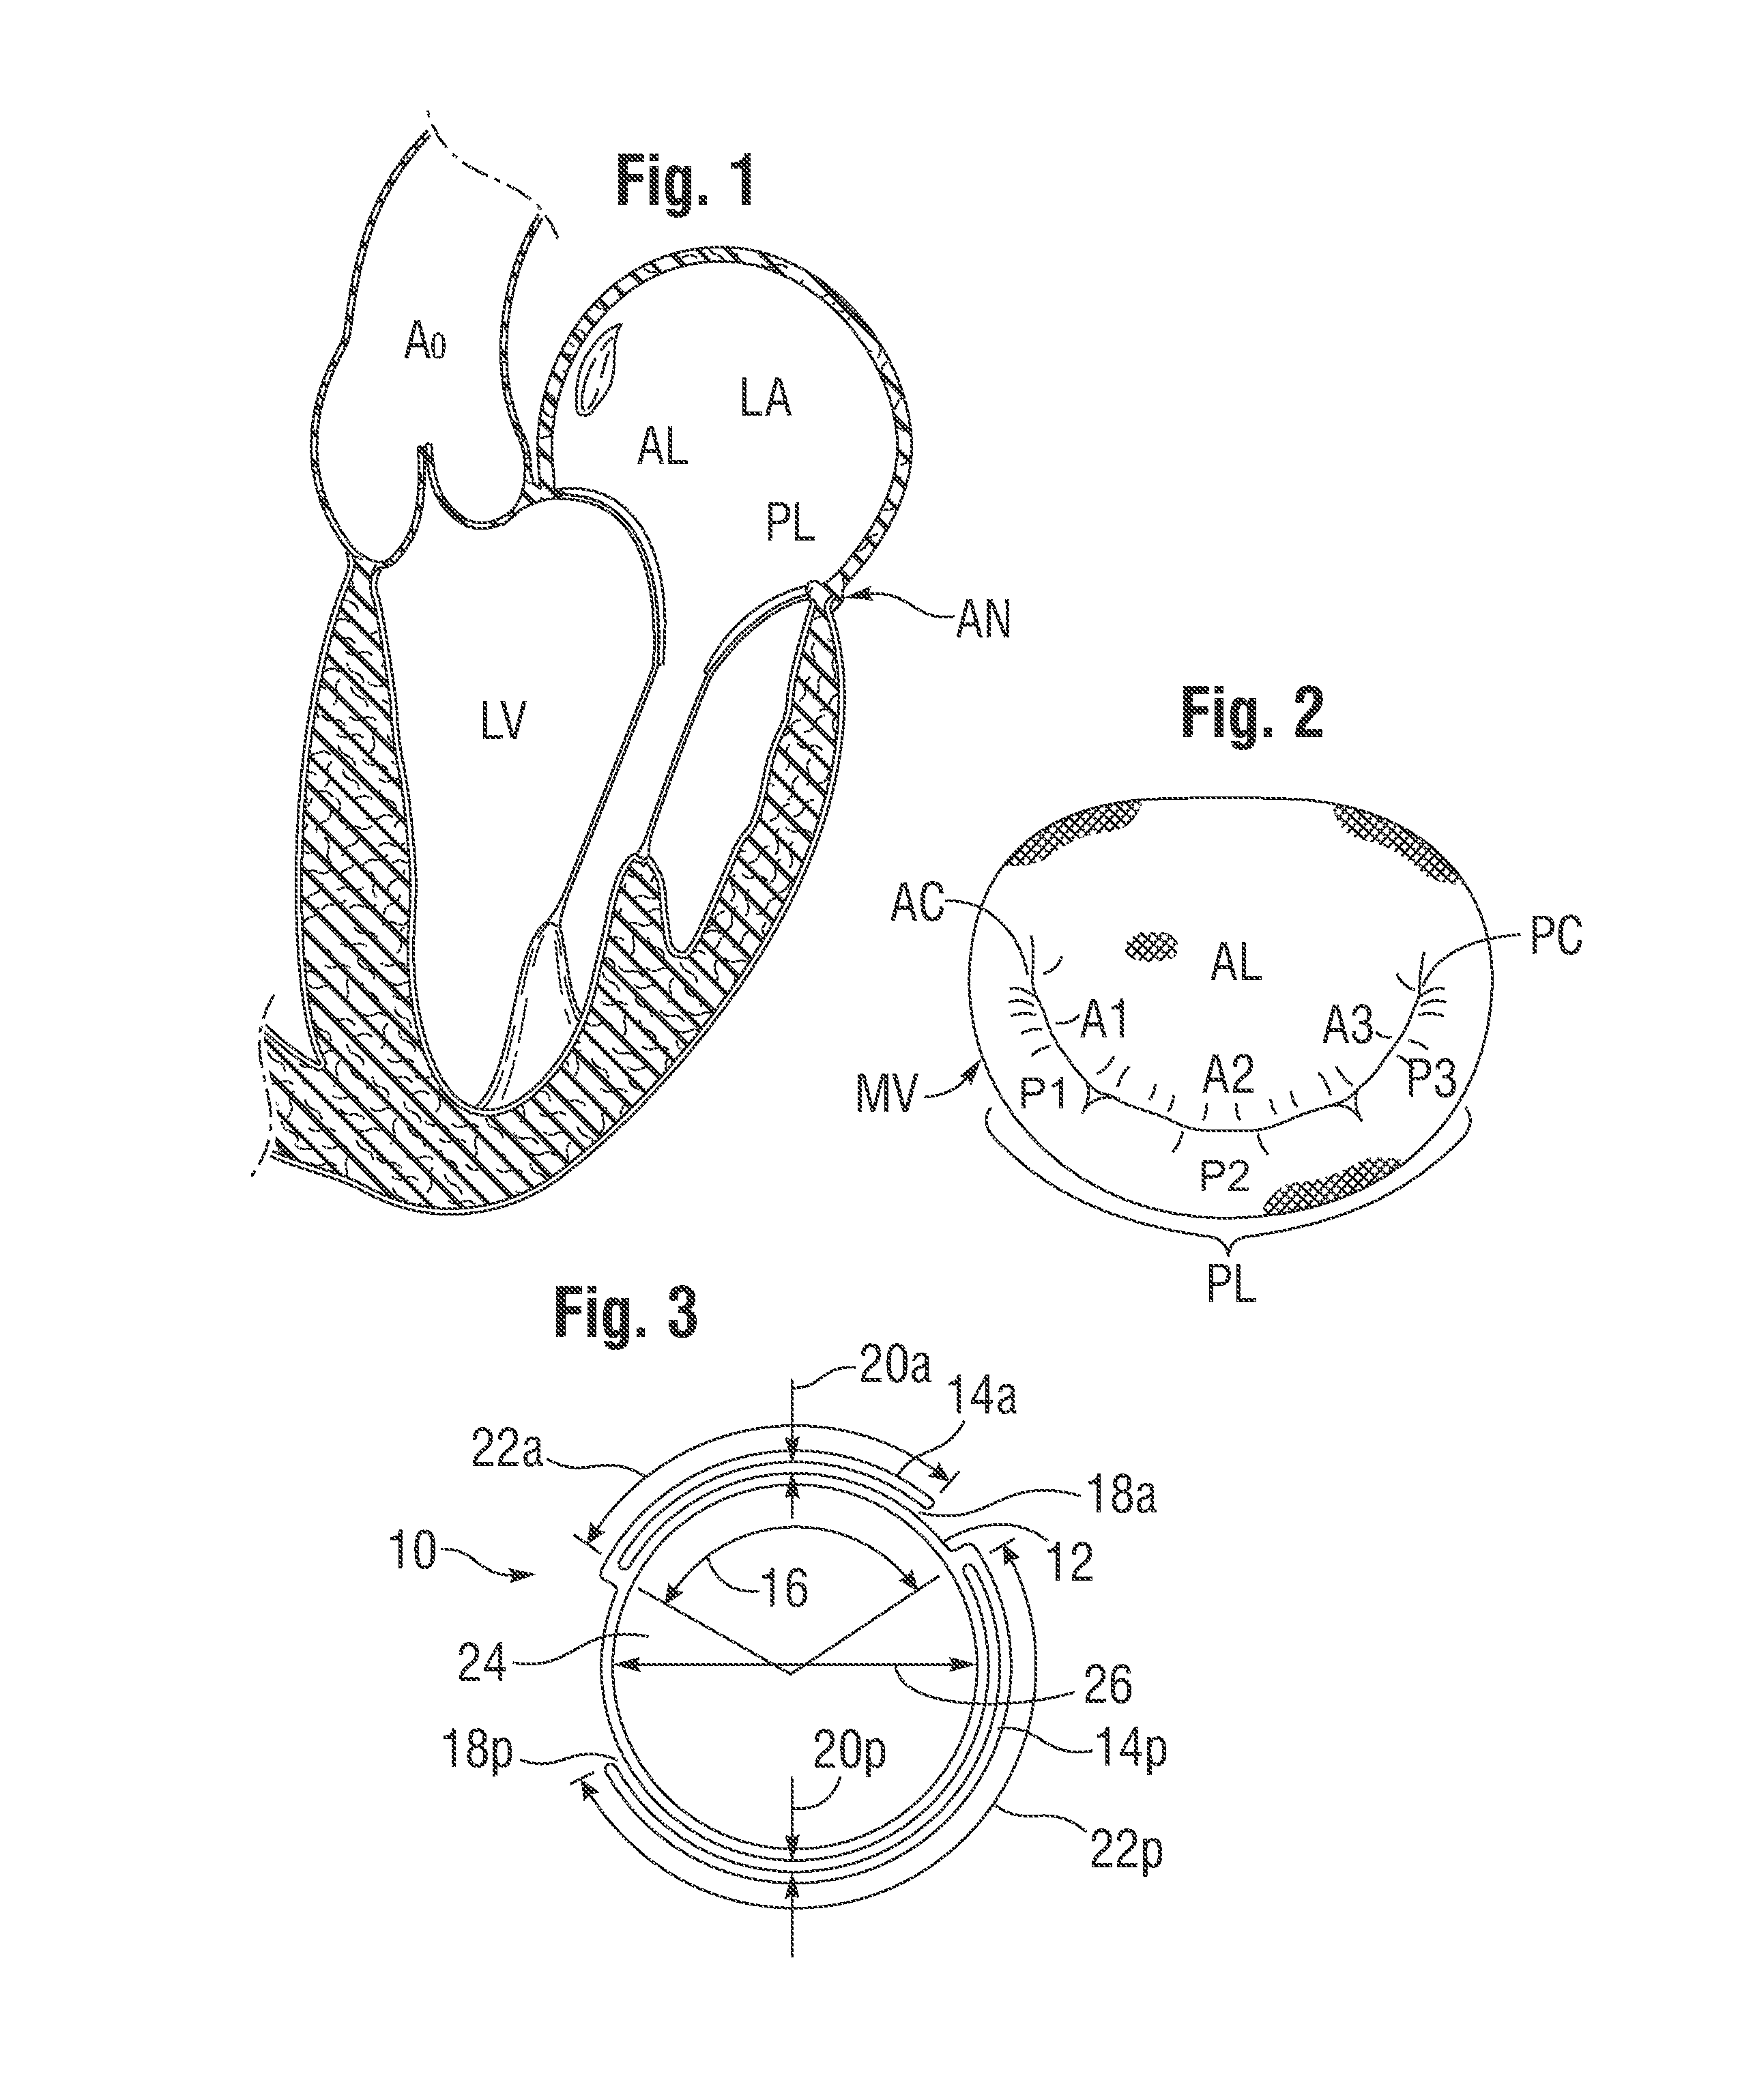 Anchoring device for replacing or repairing a heart valve